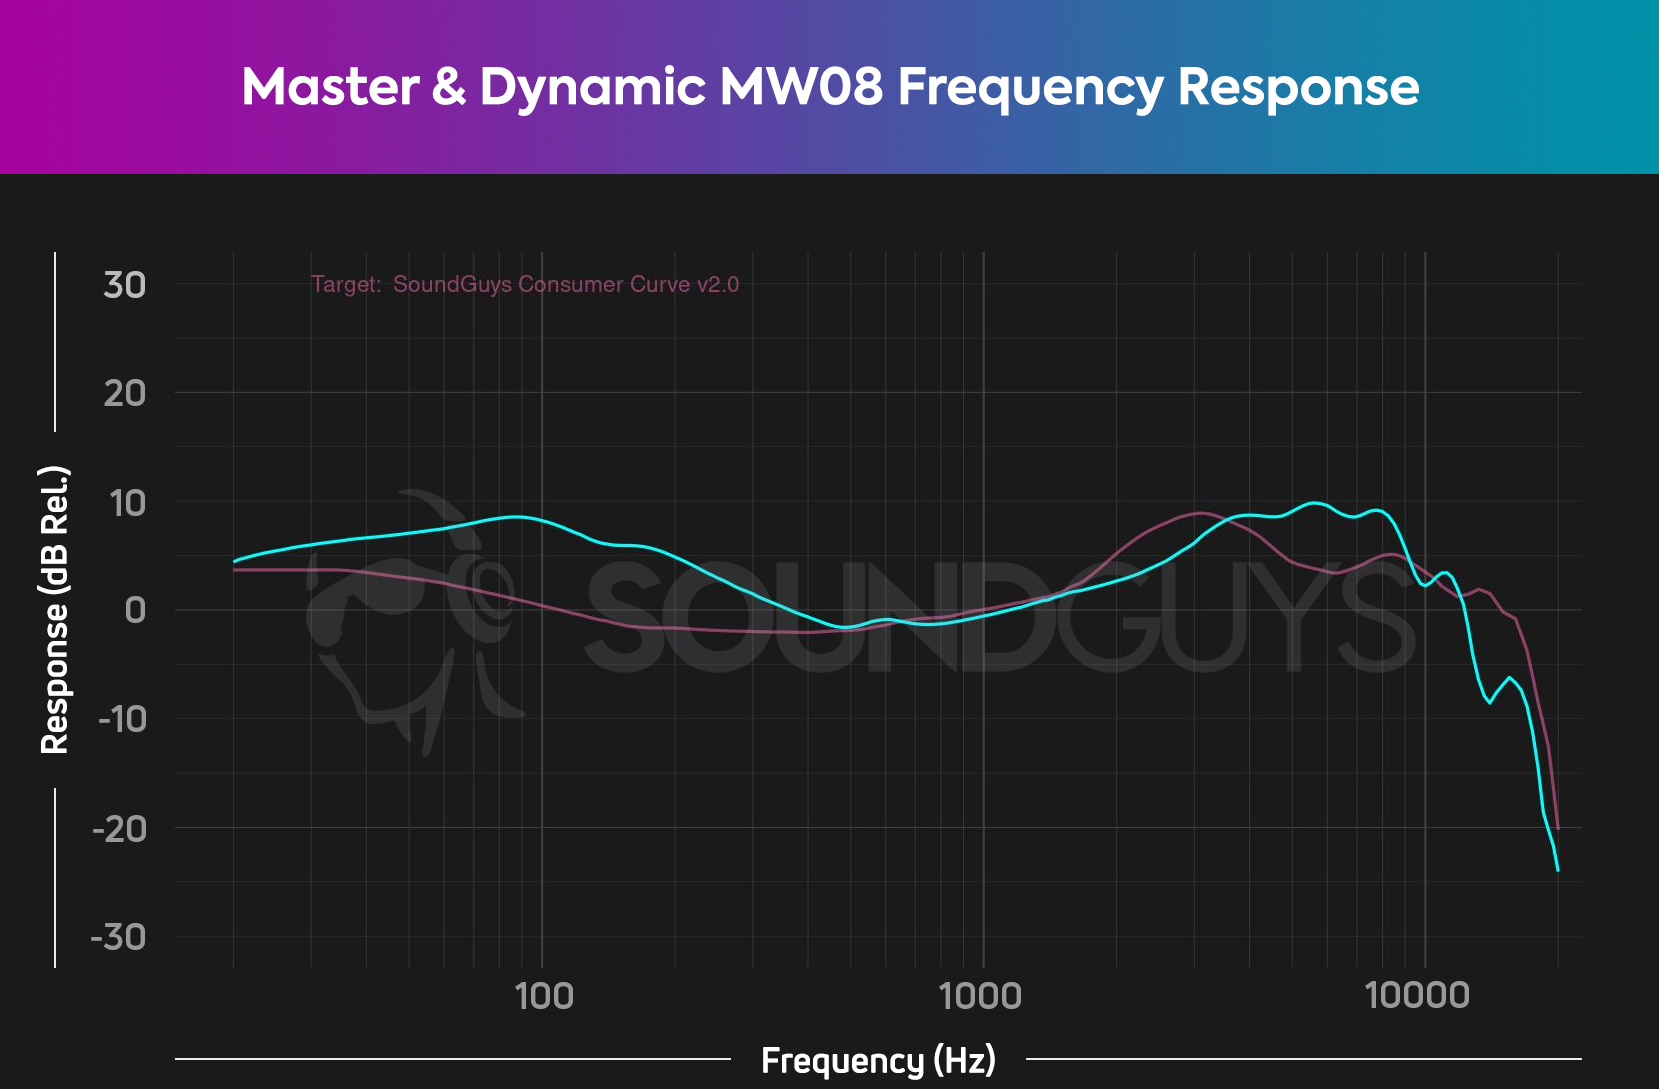 Chart shows the frequency response of the Master &amp; Dynamic MW08 compared to our target response.